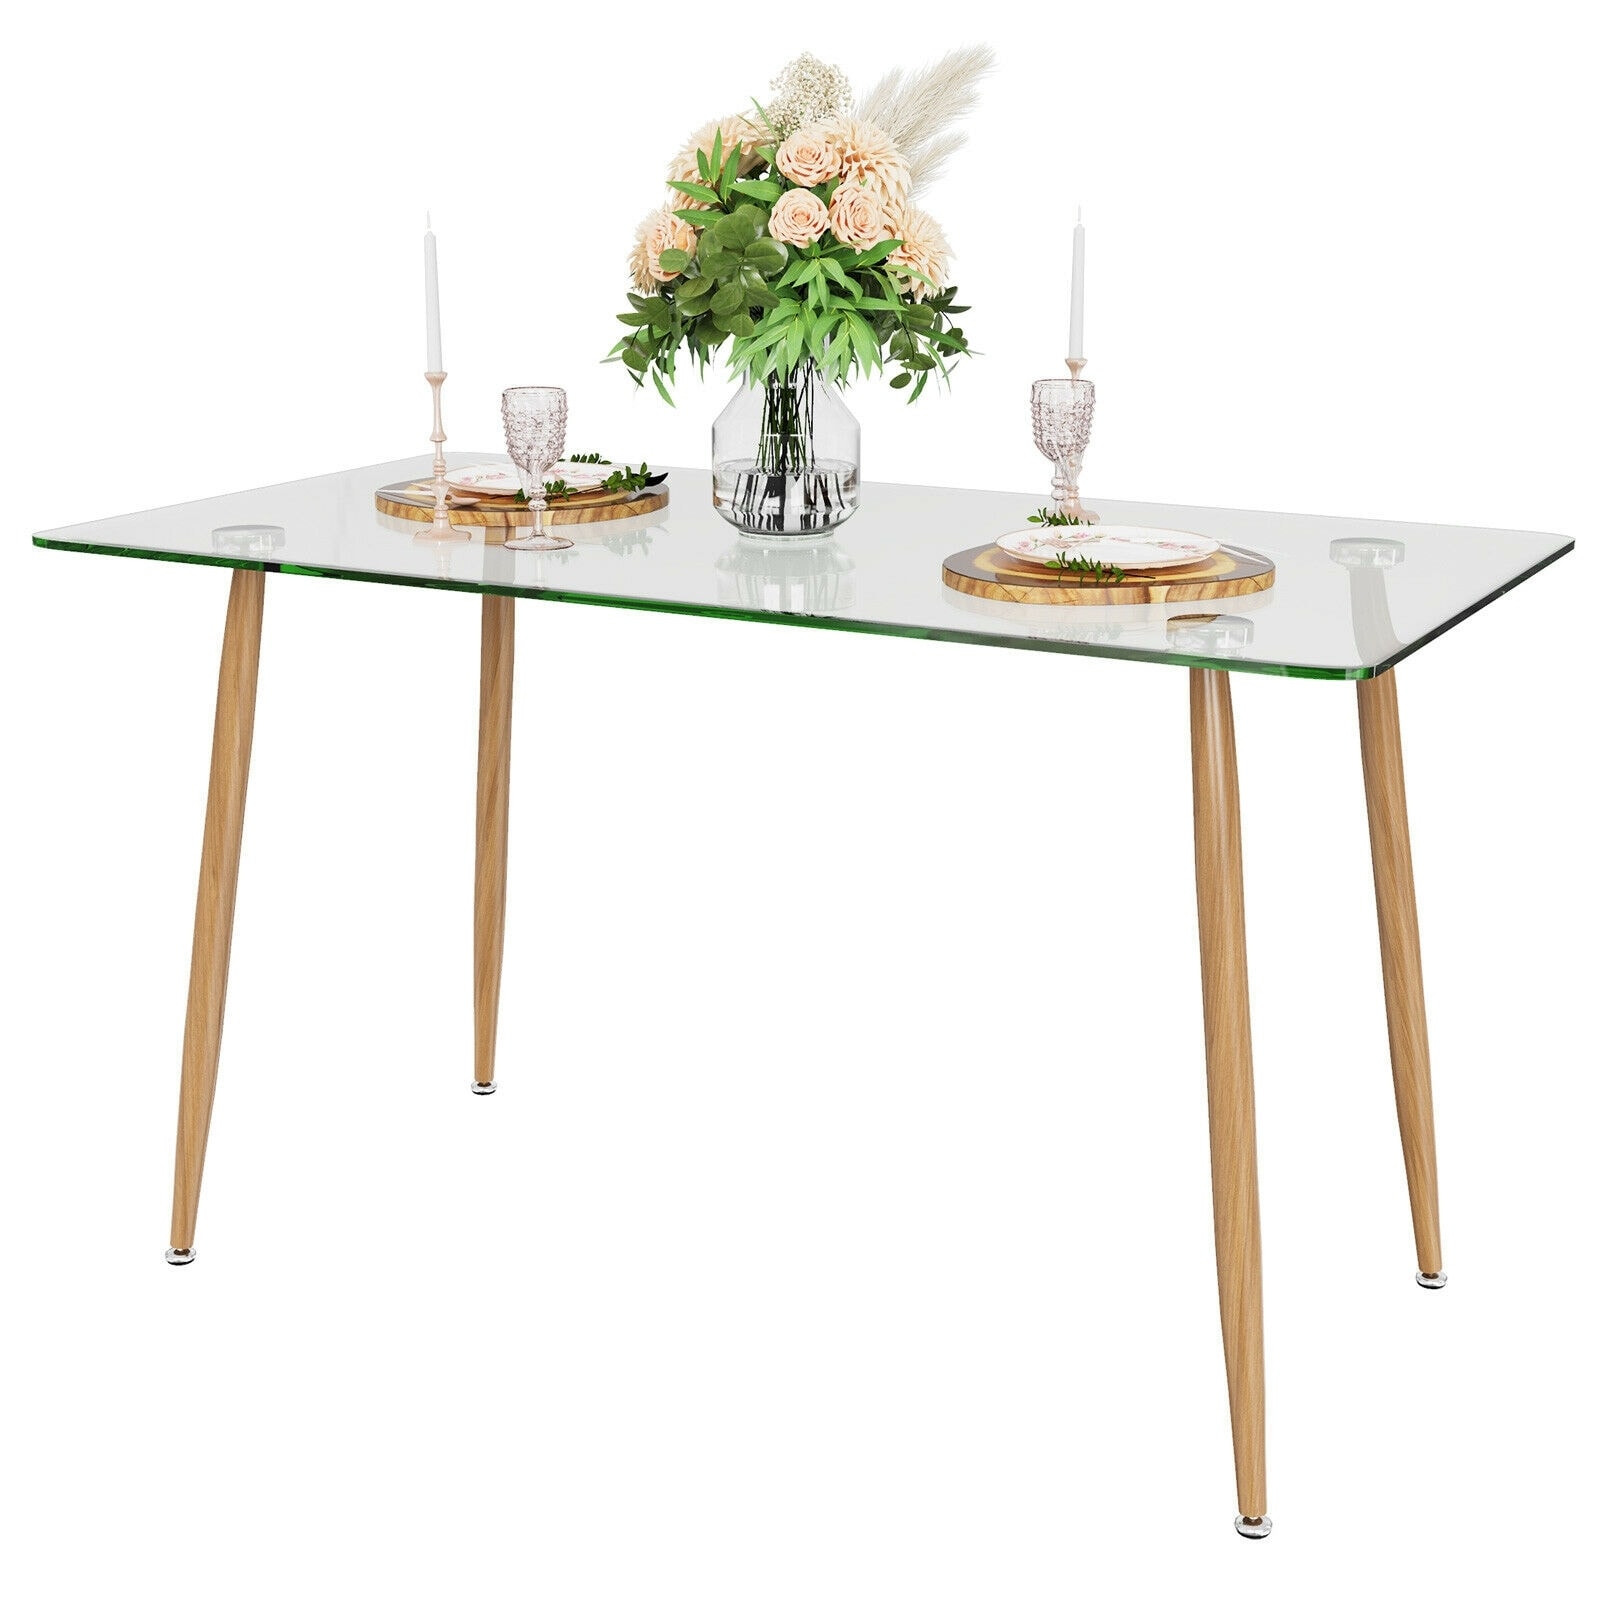 https://ak1.ostkcdn.com/images/products/is/images/direct/61f41b90ce71322413c2519f8963cb4d4645c5fb/Modern-Glass-Rectangular-Dining-Table-with-Metal-Legs.jpg